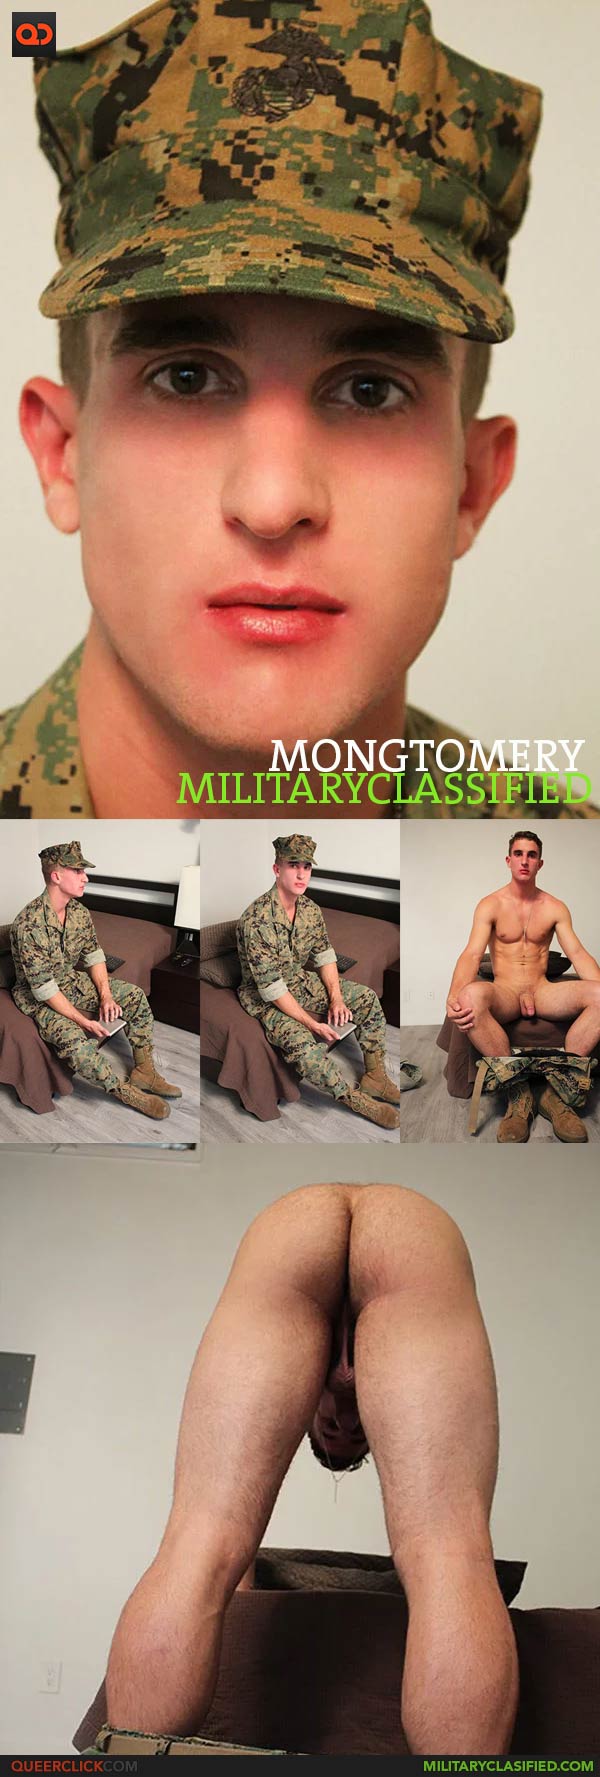 Military Classified: Montgomery